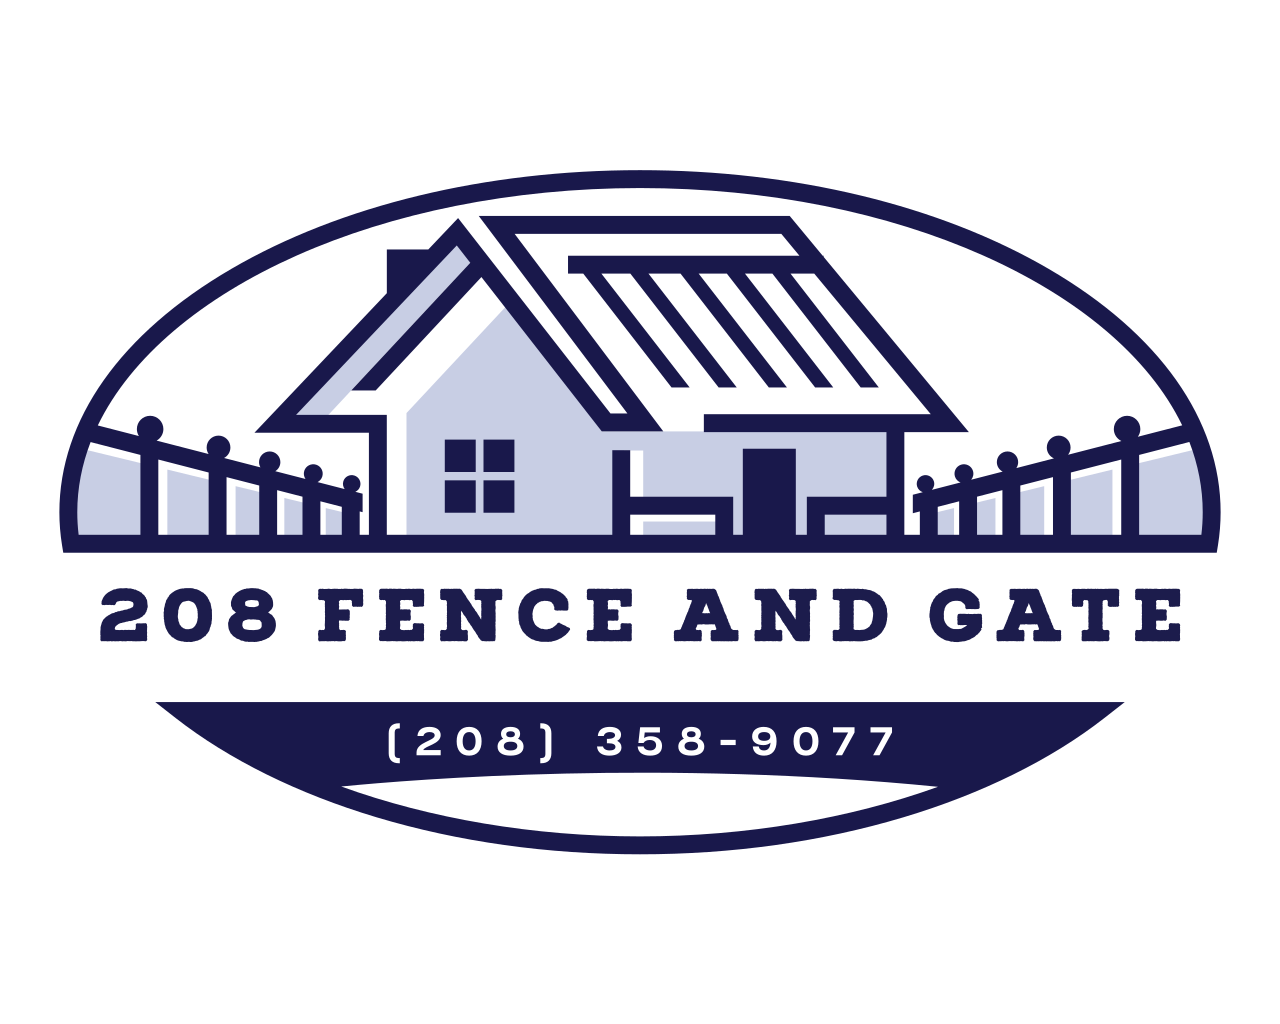 208 Fence and Gate